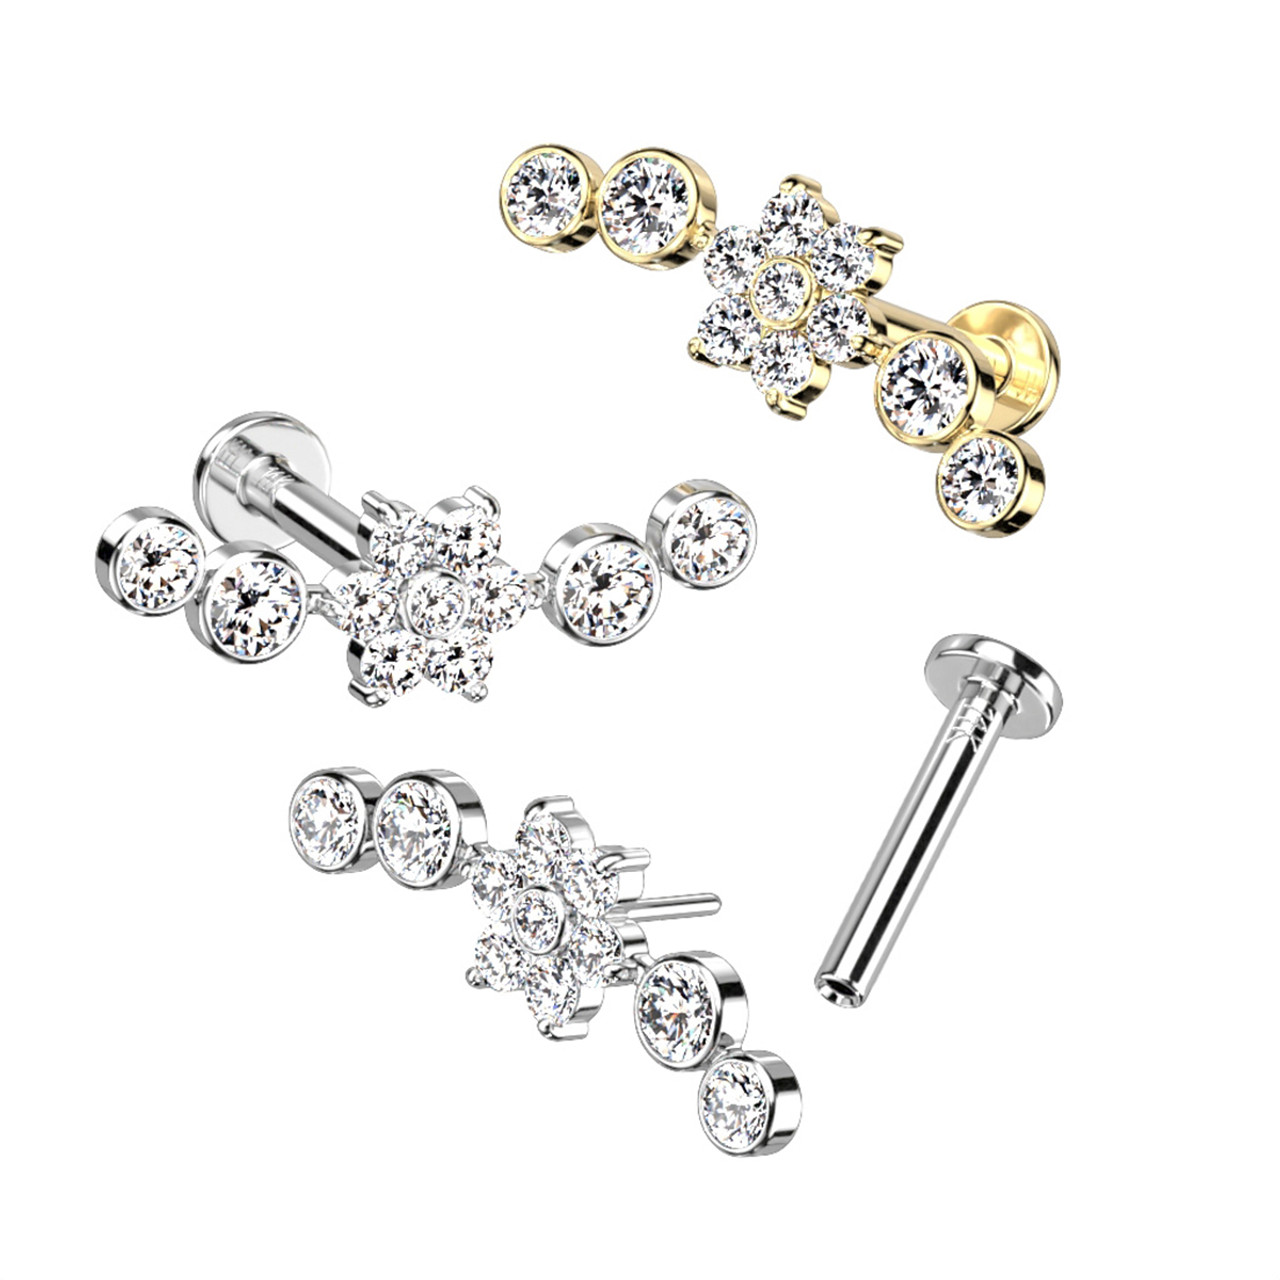 14K Gold Threadless Labret 3mm Flat Back Stud With Flower Center and 2 CZ Ball on Each Side